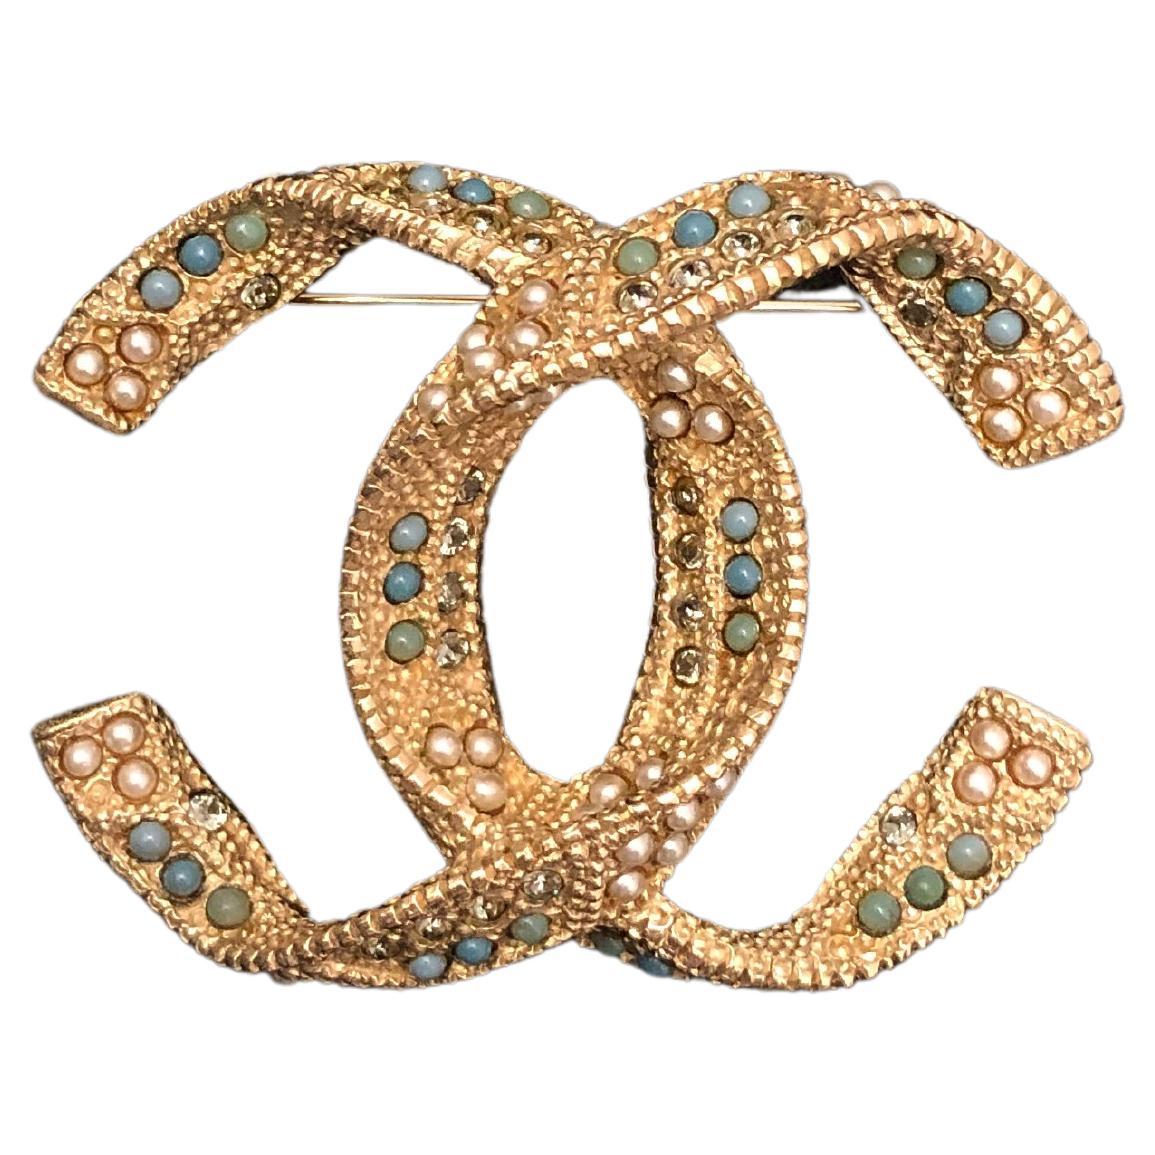 2015 CHANEL Gold Toned FauxPearl Rhinestone CC Brooch For Sale